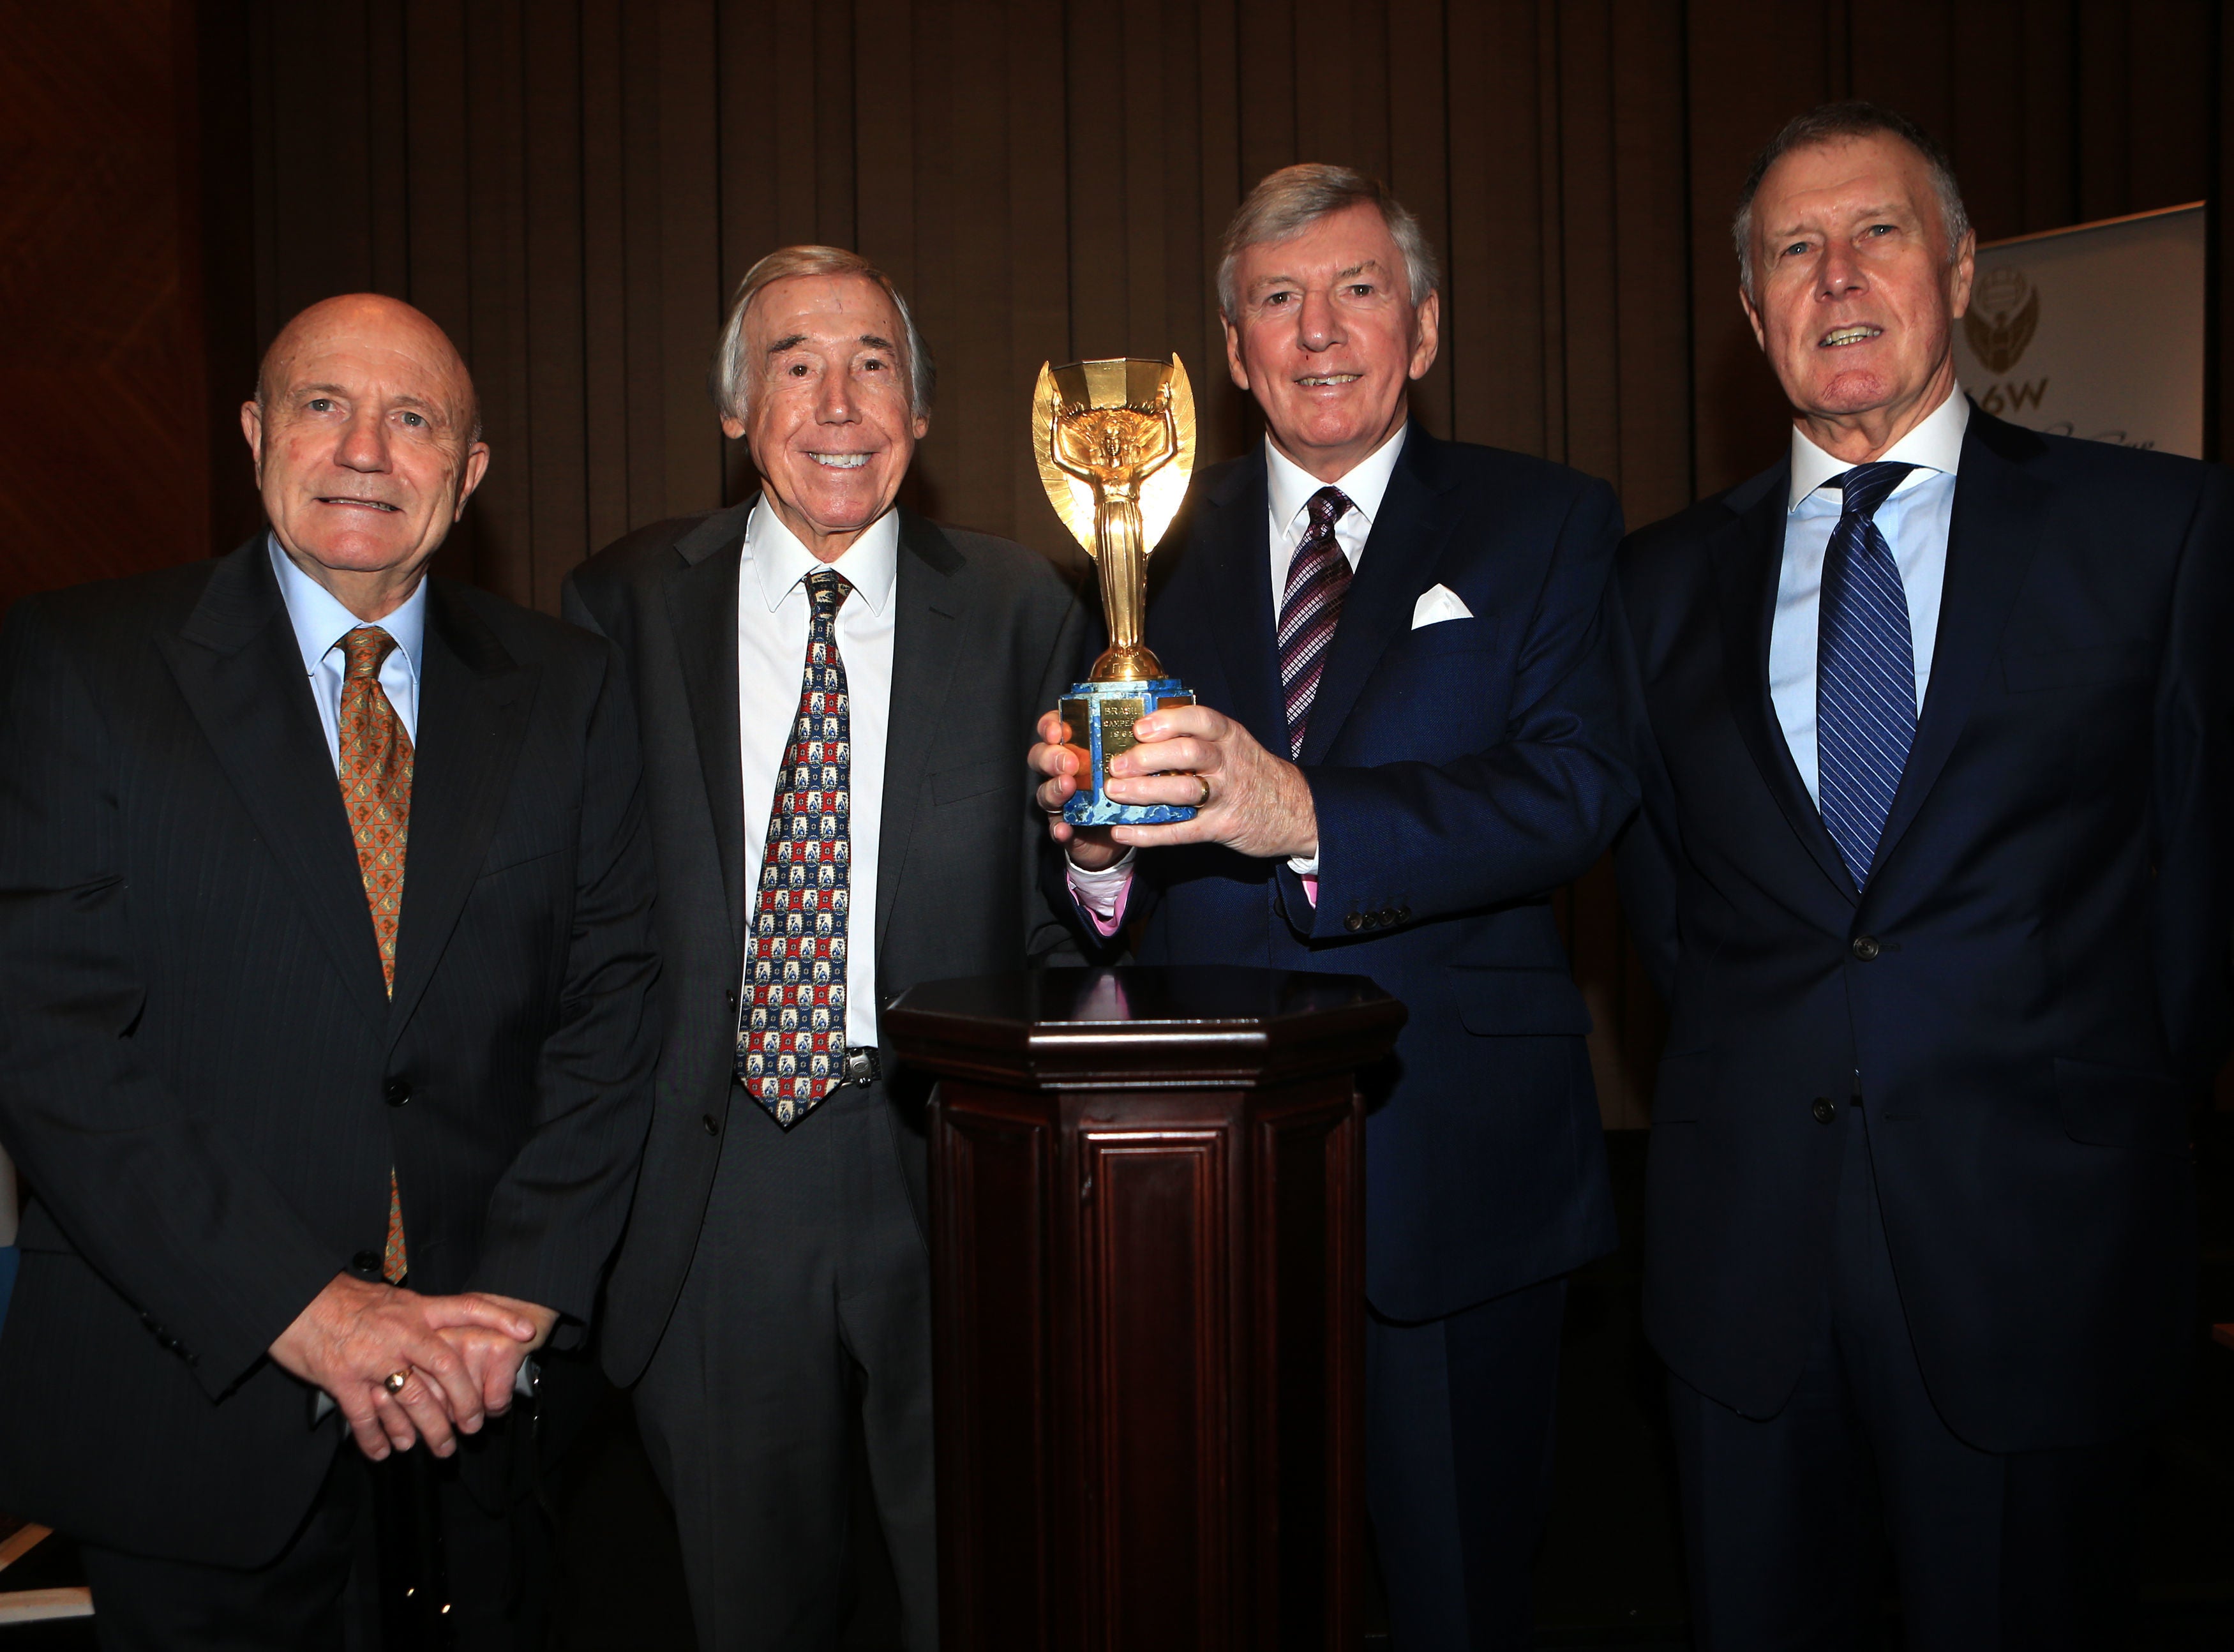 Boys of 66: Cohen, Gordon Banks, Martin Peters and Sir Geoff Hurst pose with the Jules Rimet trophy in 2016